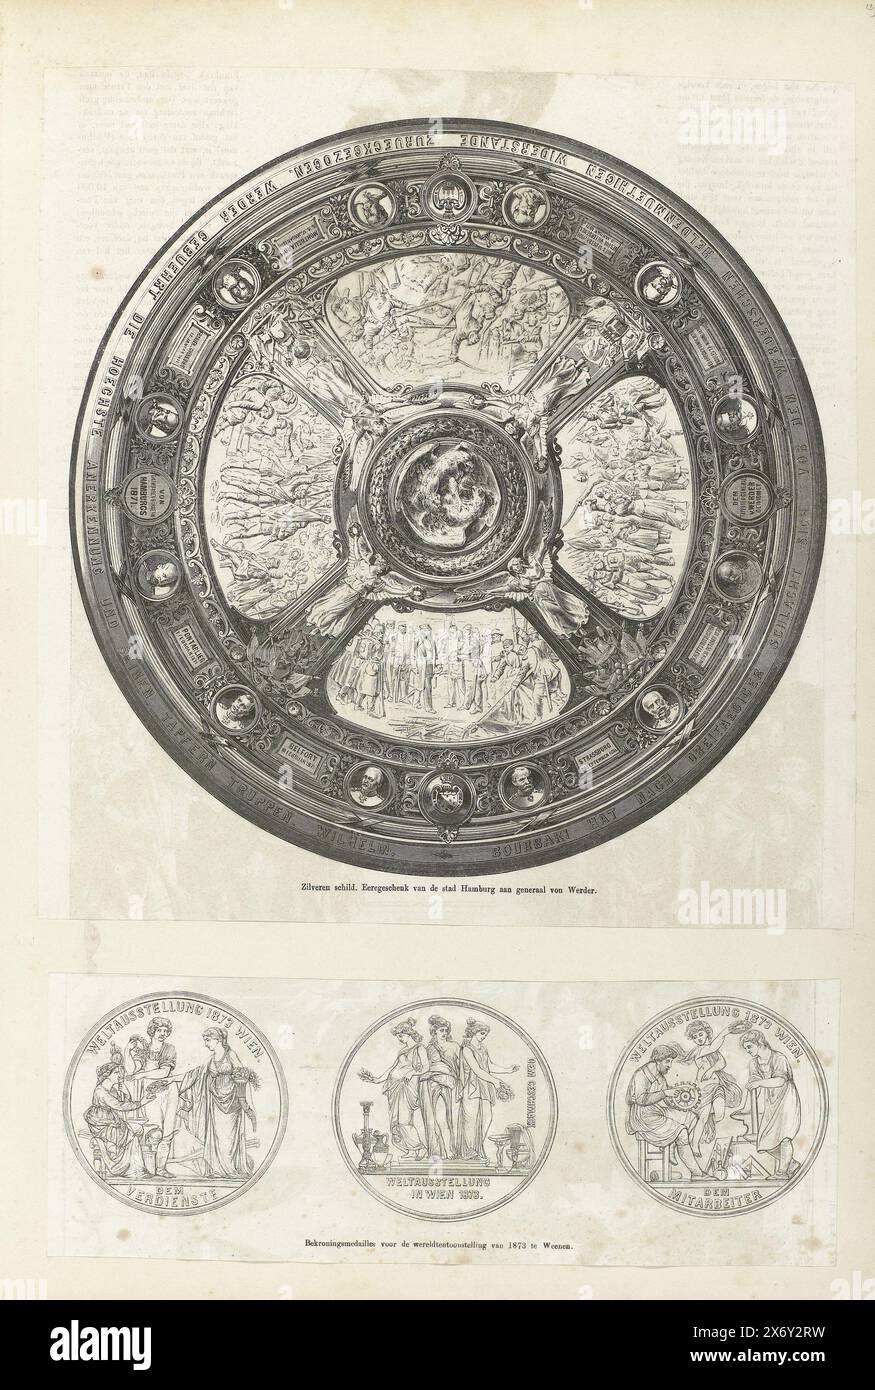 Silver shield and three award medals for the world exhibition of 1873, Weltausstellung 1873 Wien (...) (title on object), Two loose leaves pasted together, on the top is a silver shield with two fighting eagles in the middle and in the outer borders portrait medallions and text. The shield was an honorary gift from the city of Hamburg to General von Werder. On the bottom sheet there are three medals, the middle one with three women, two of whom are holding a laurel wreath., print, after design by: Joseph Tautenhayn, print maker: anonymous, publisher: anonymous, Austria, (possibly), 1873 Stock Photo